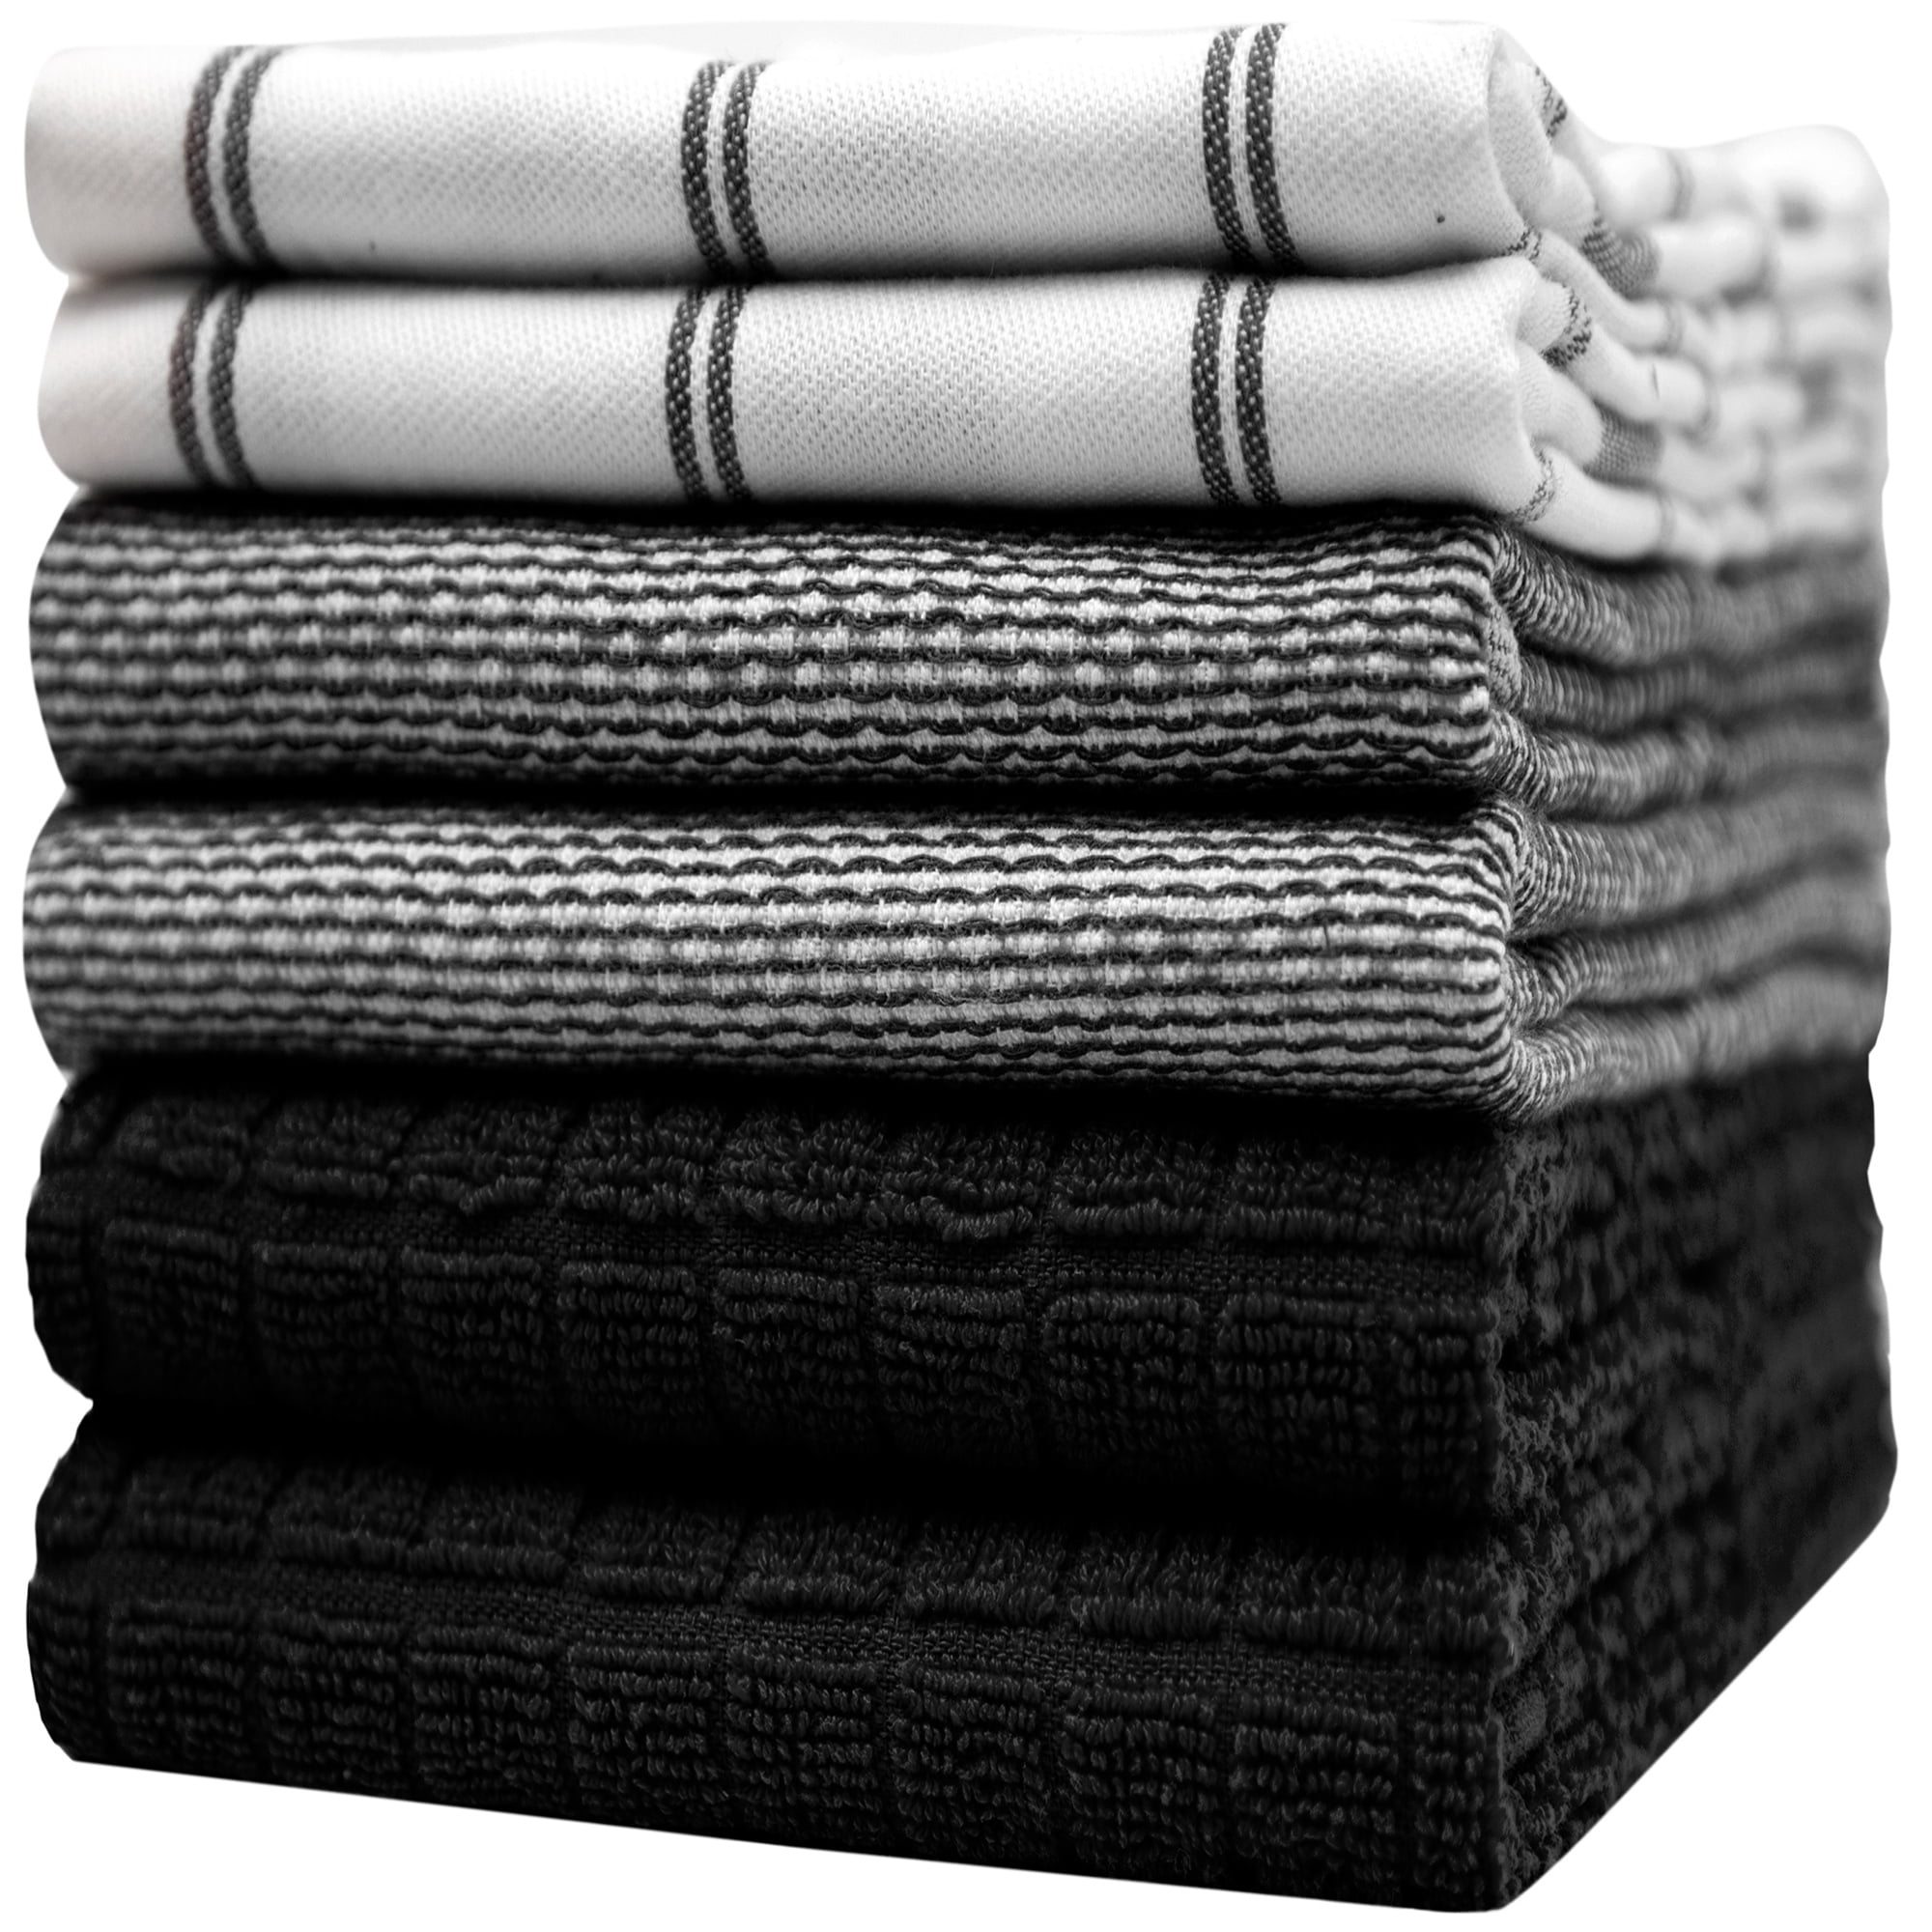 BLACK & Checked  3 Tea Towels Professional 100% Cotton Thick Terry